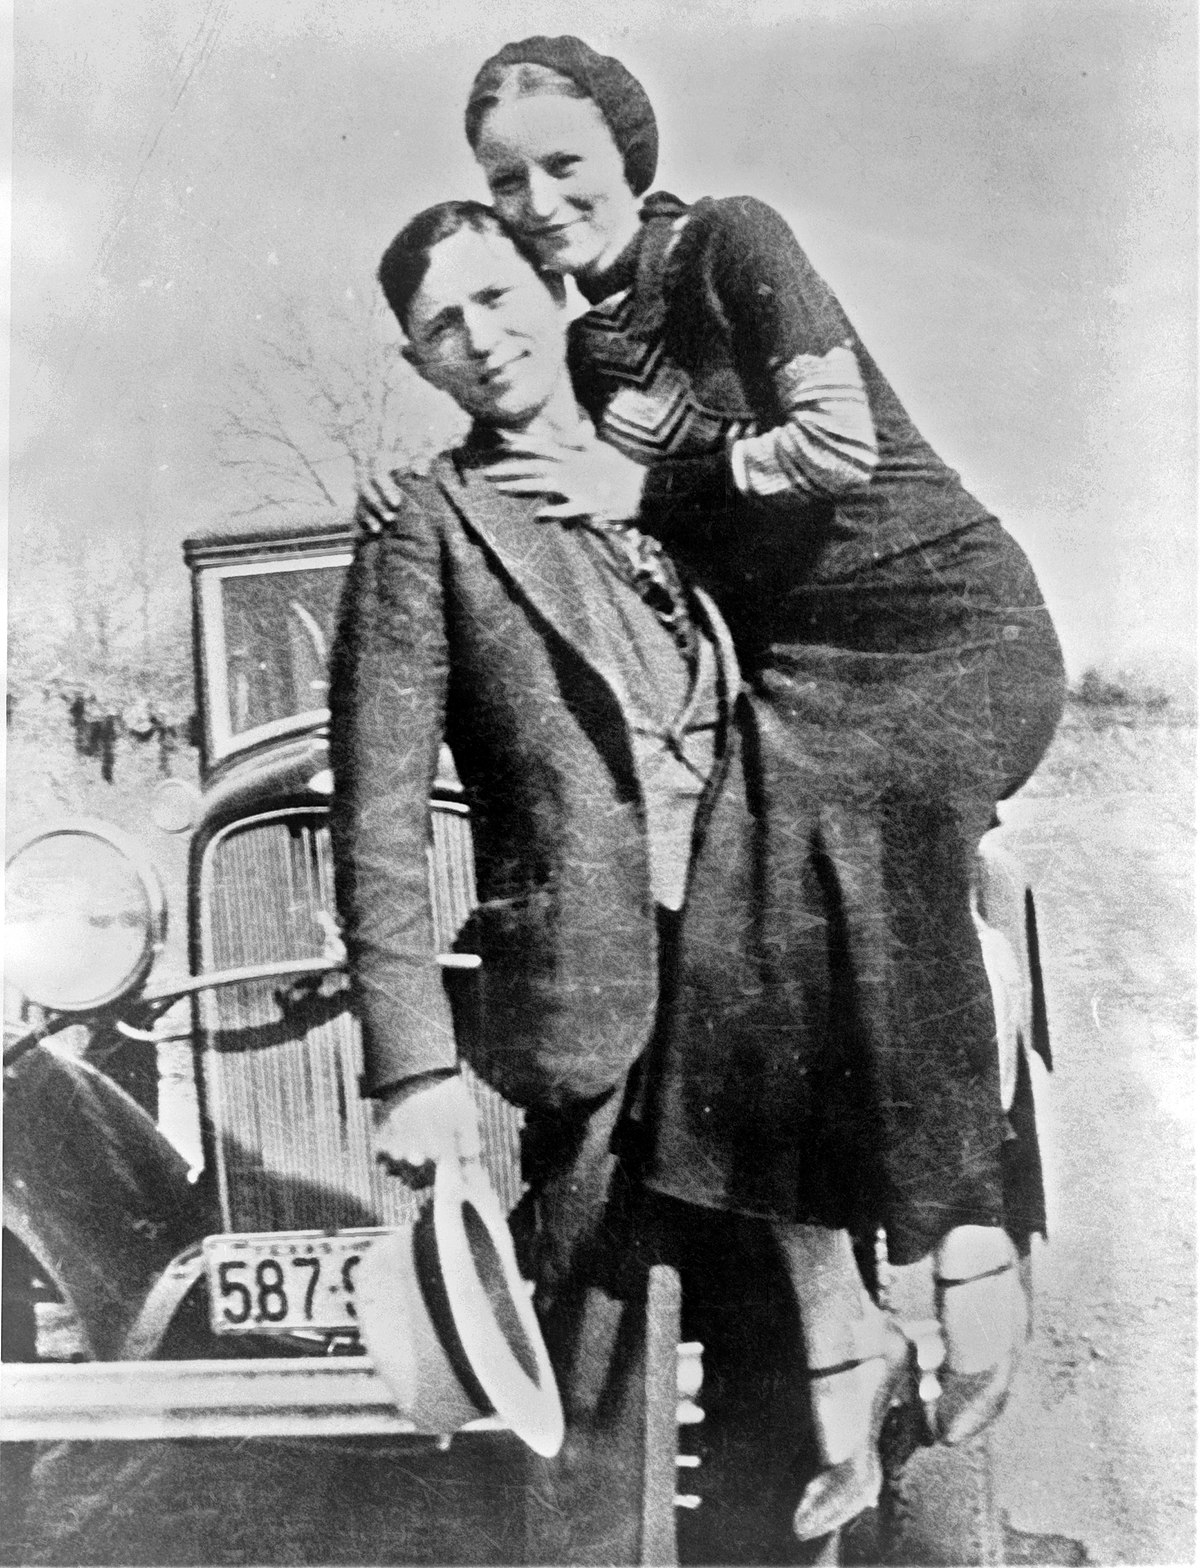 Bonnie and Clyde - biggest gangsters of all time